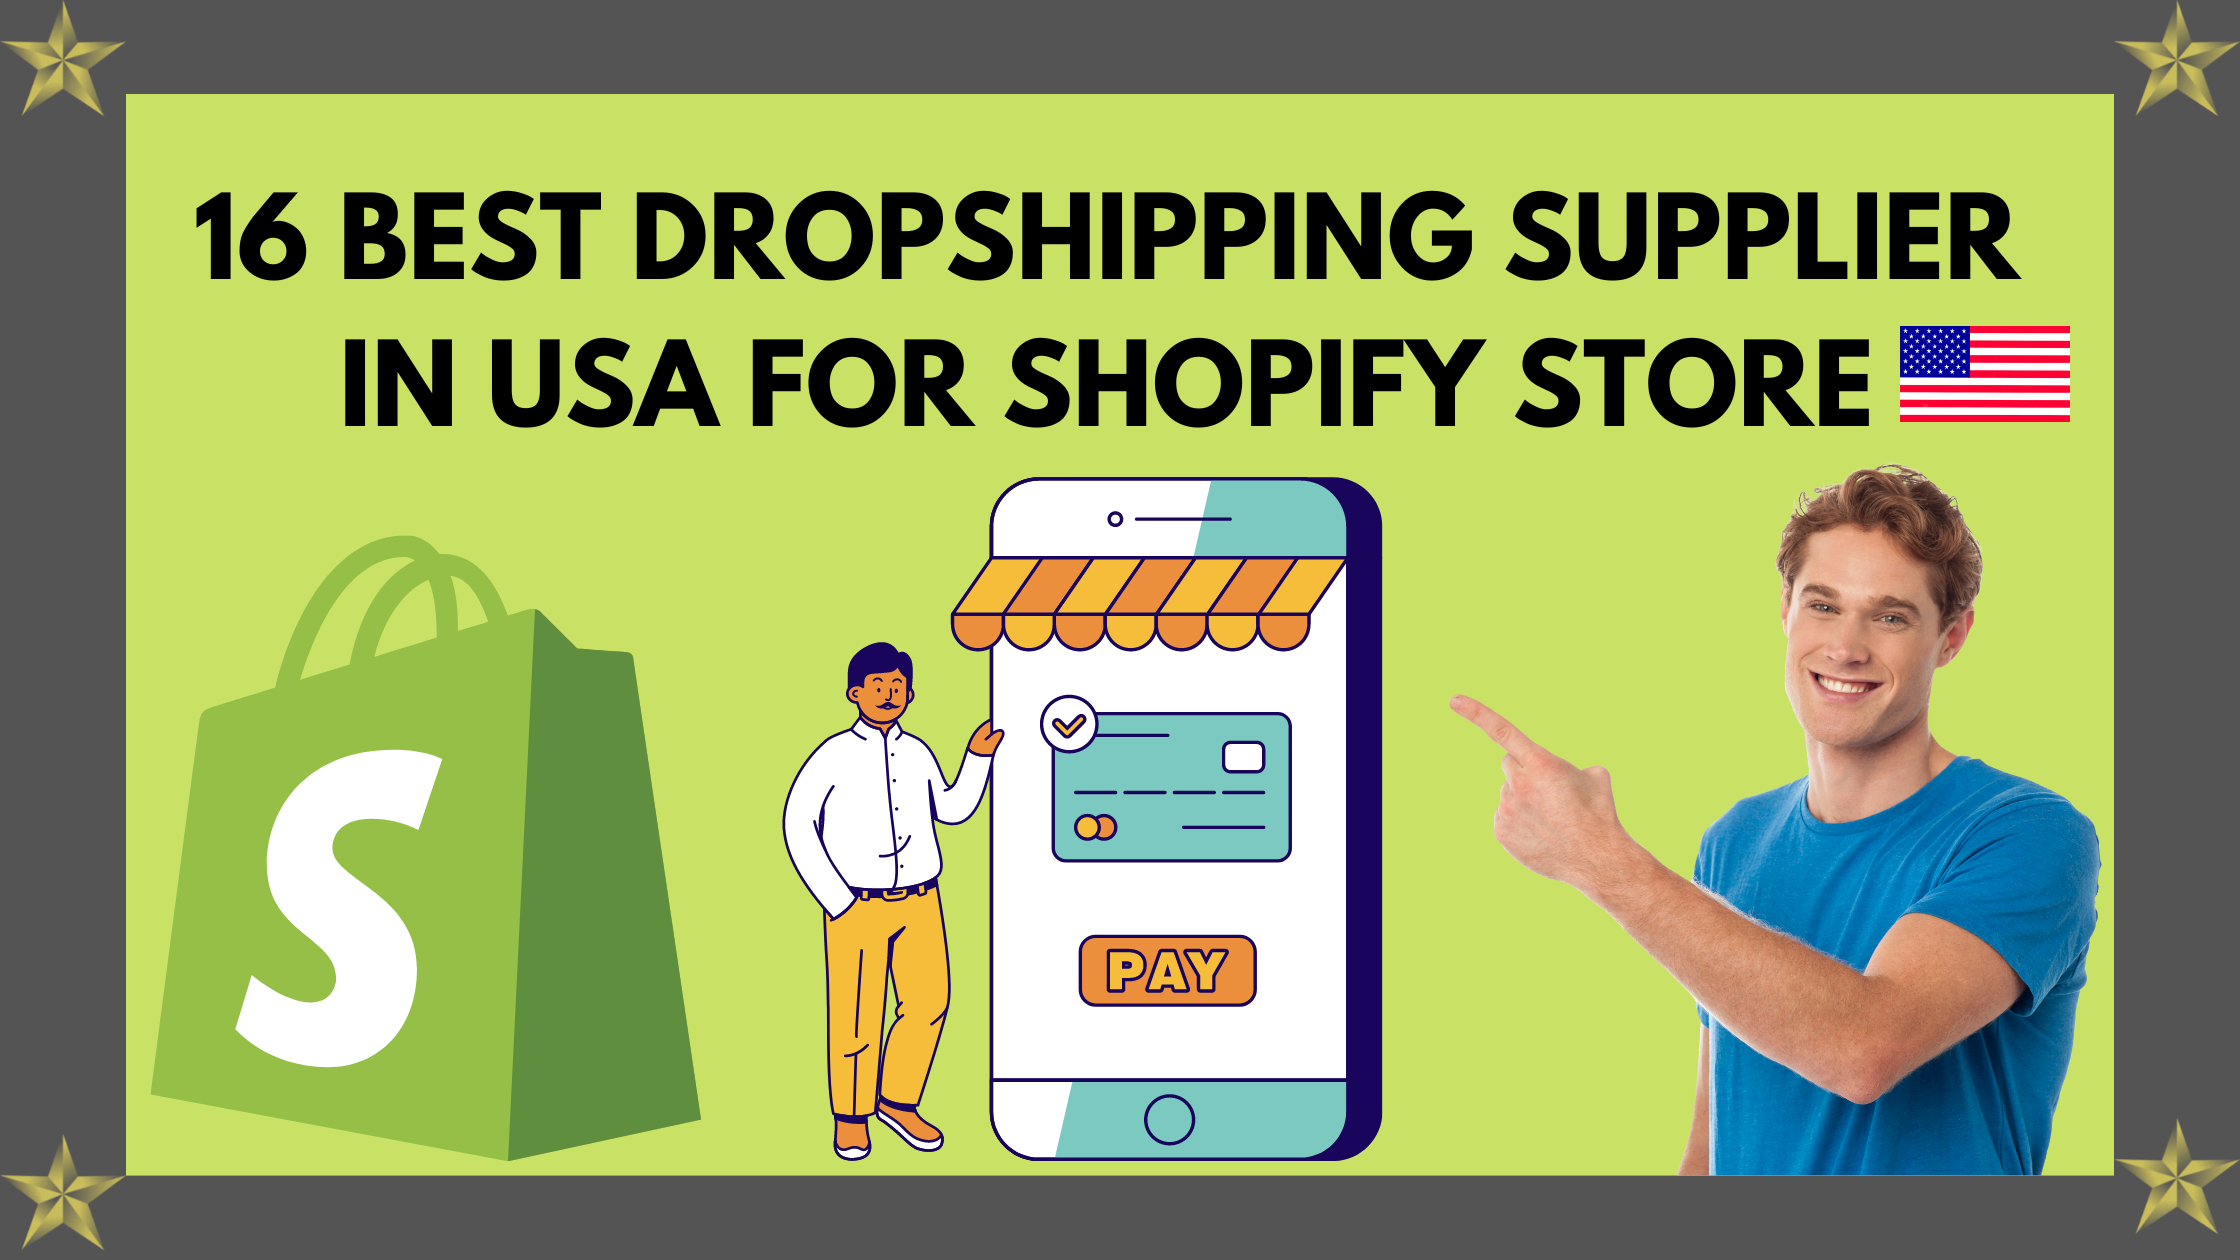 The 16 best dropshipping supplier in USA for Shopify Store